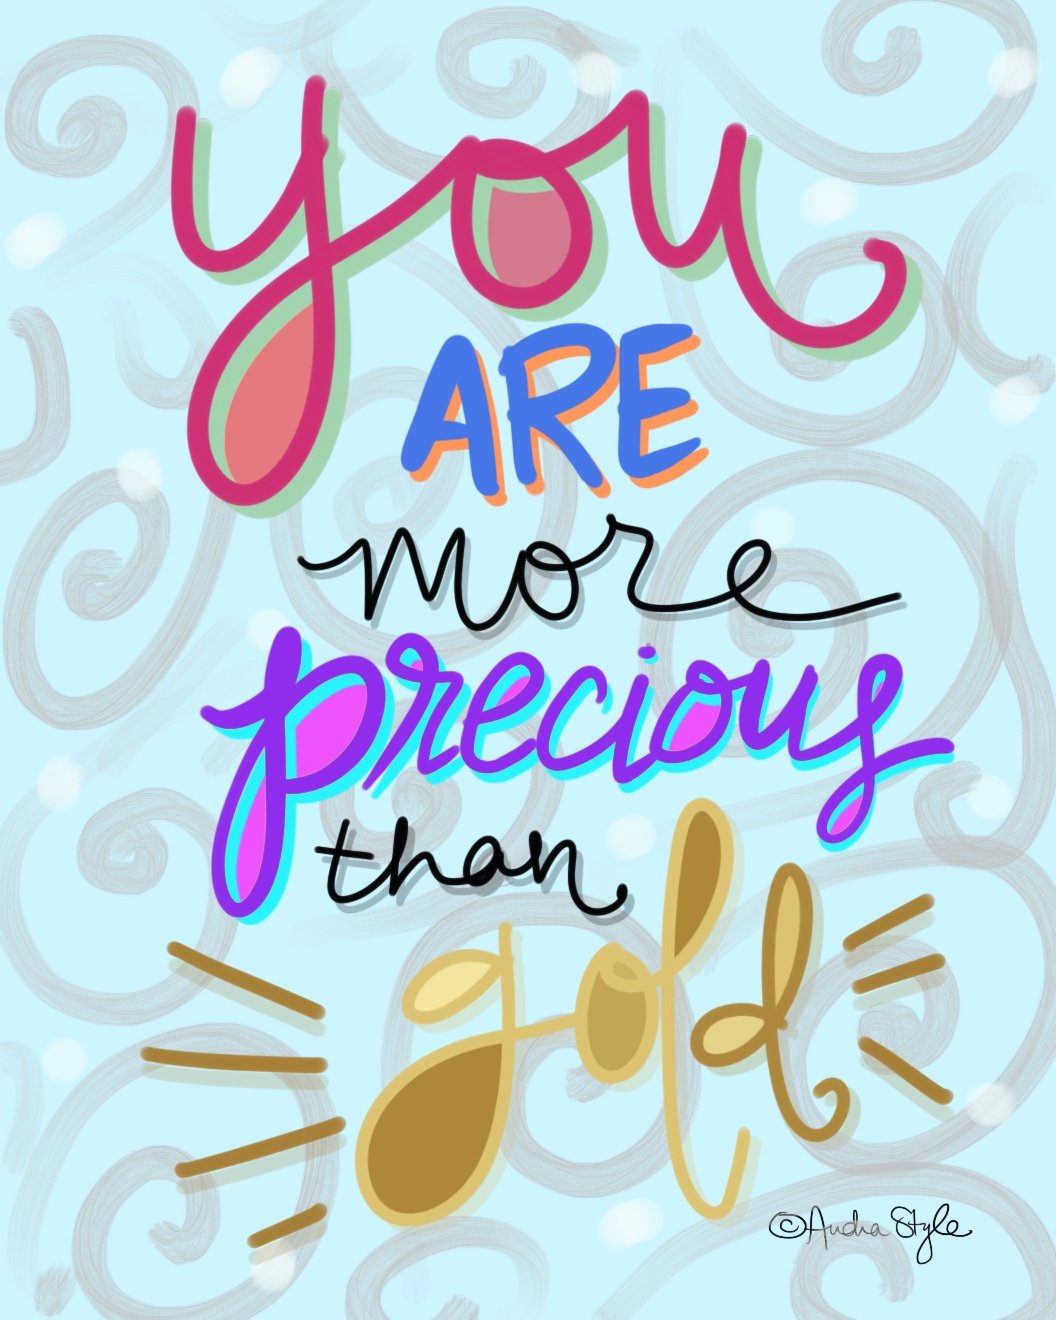 "You are more precious than gold" Light Teal Background Canvas